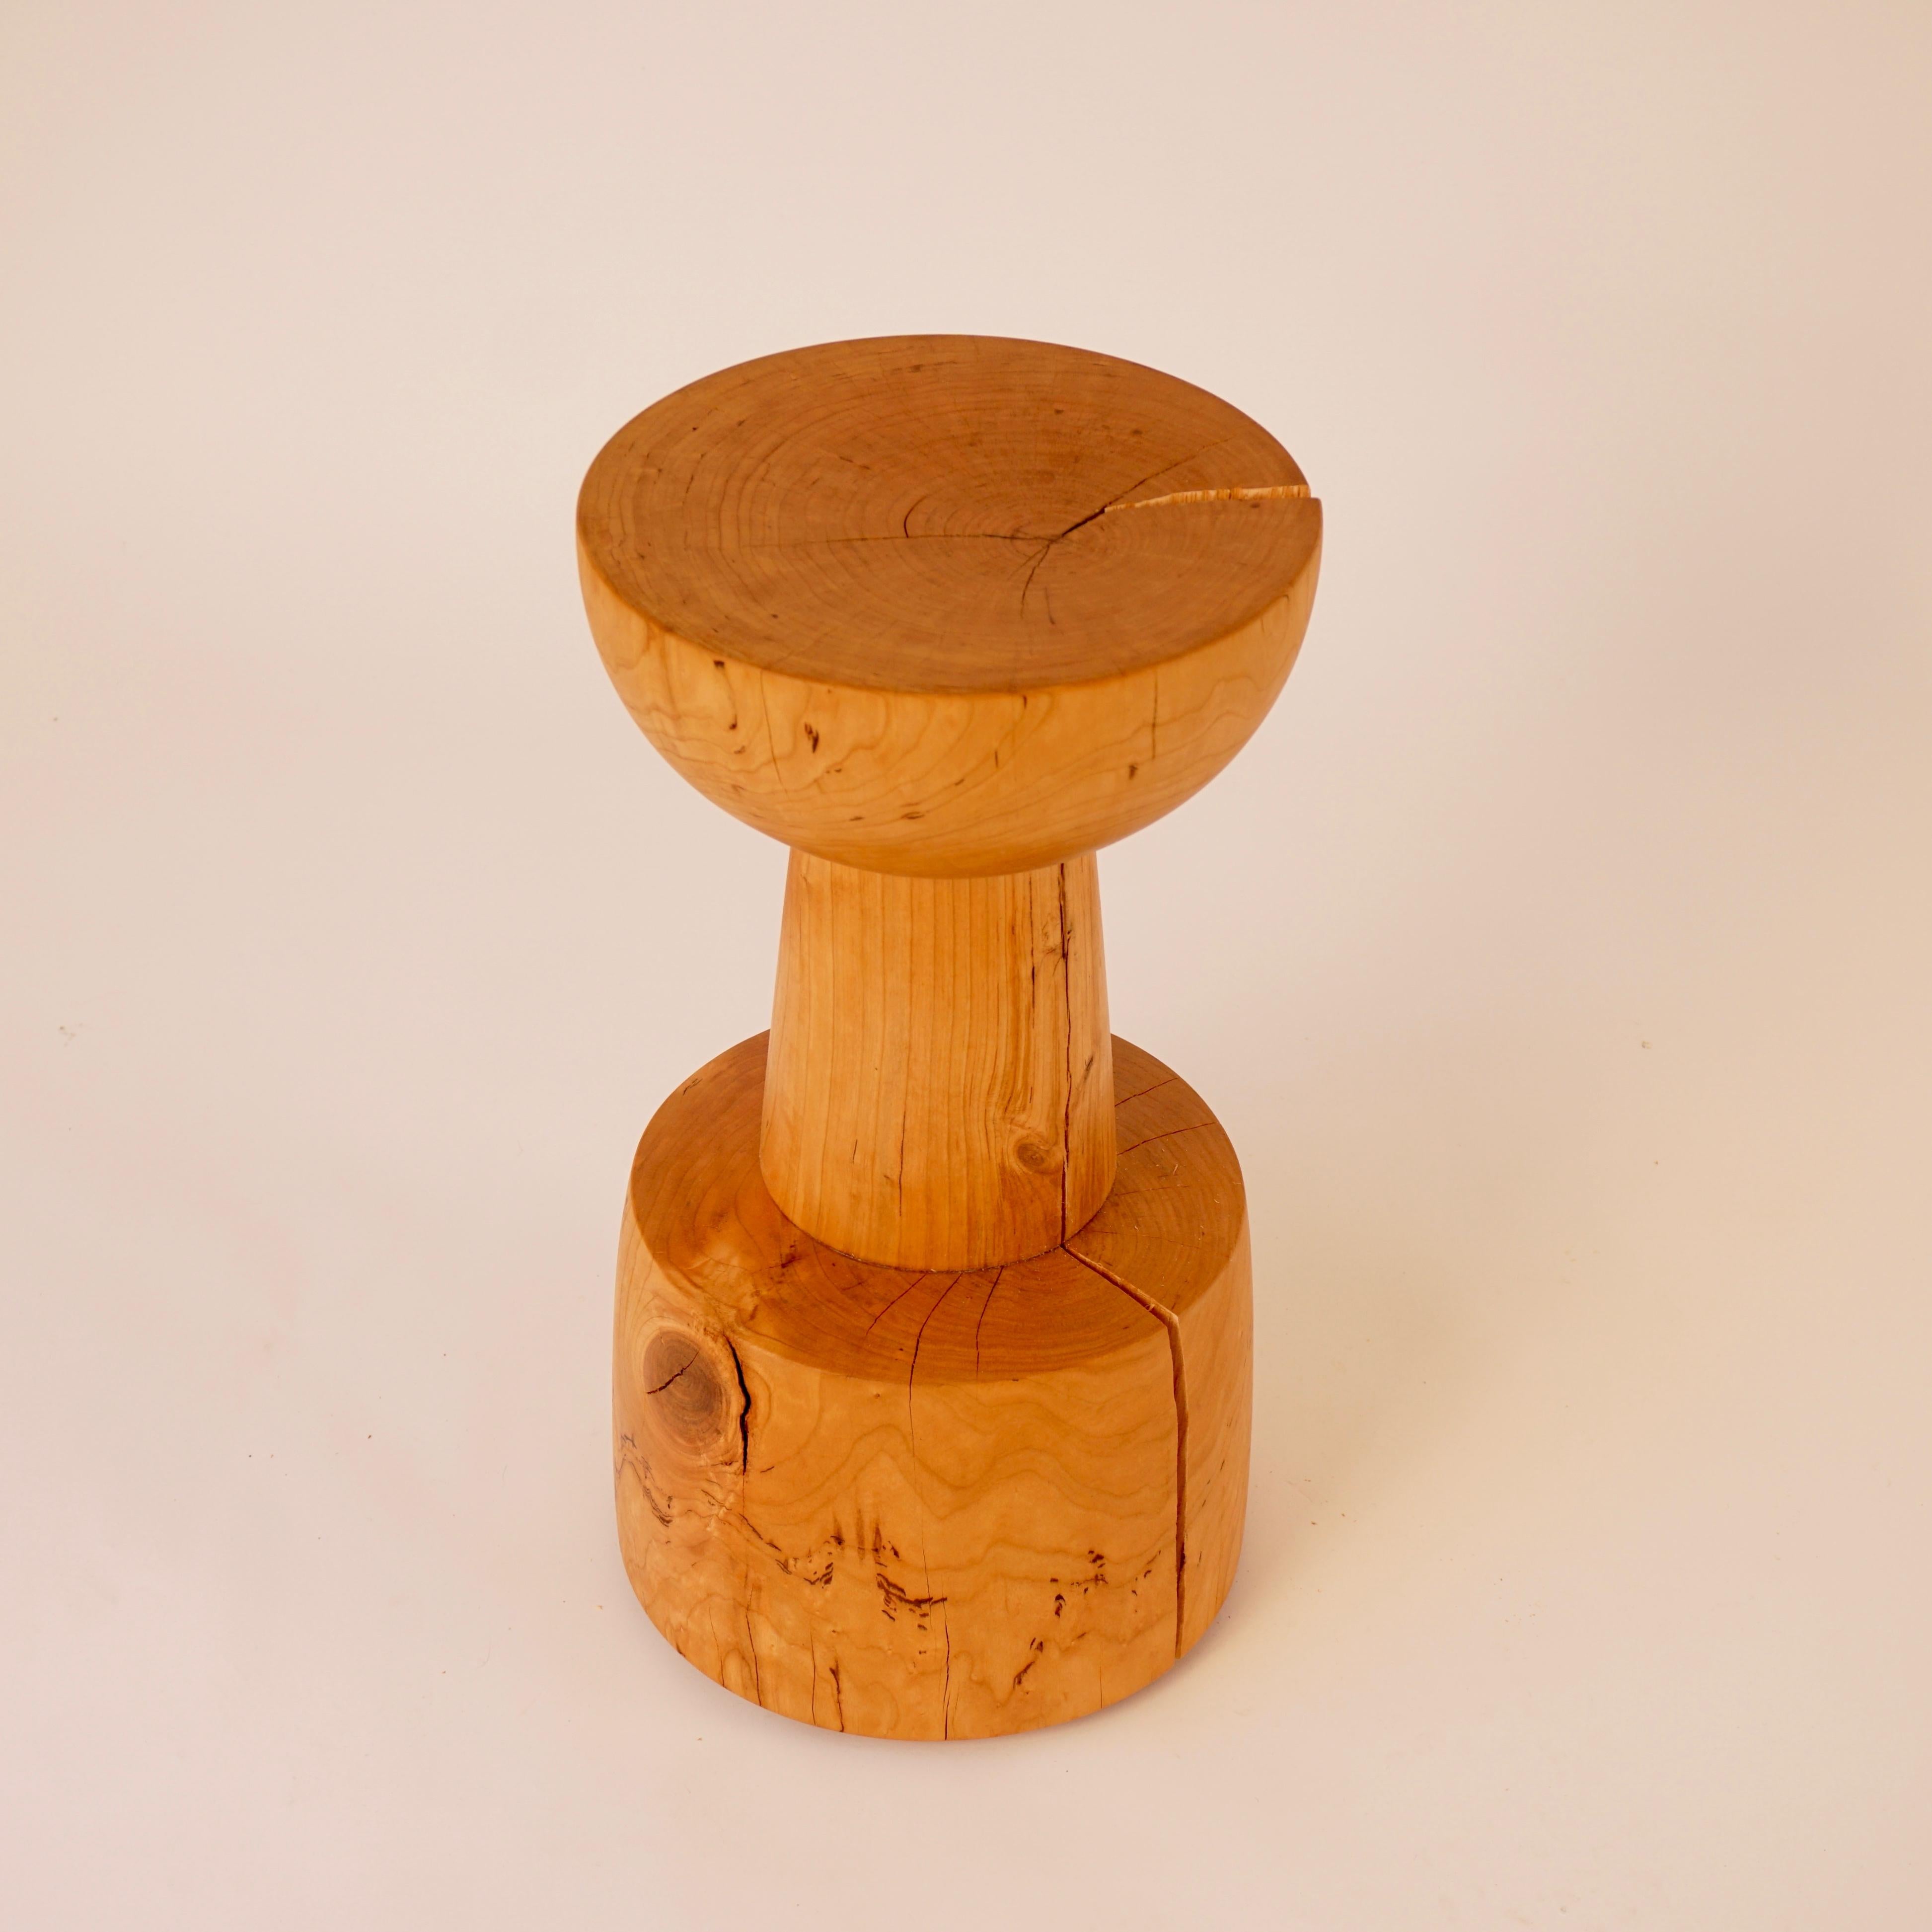 Contemporary Turned Wooden Mini-Pedestal Table #6 in Cherry For Sale